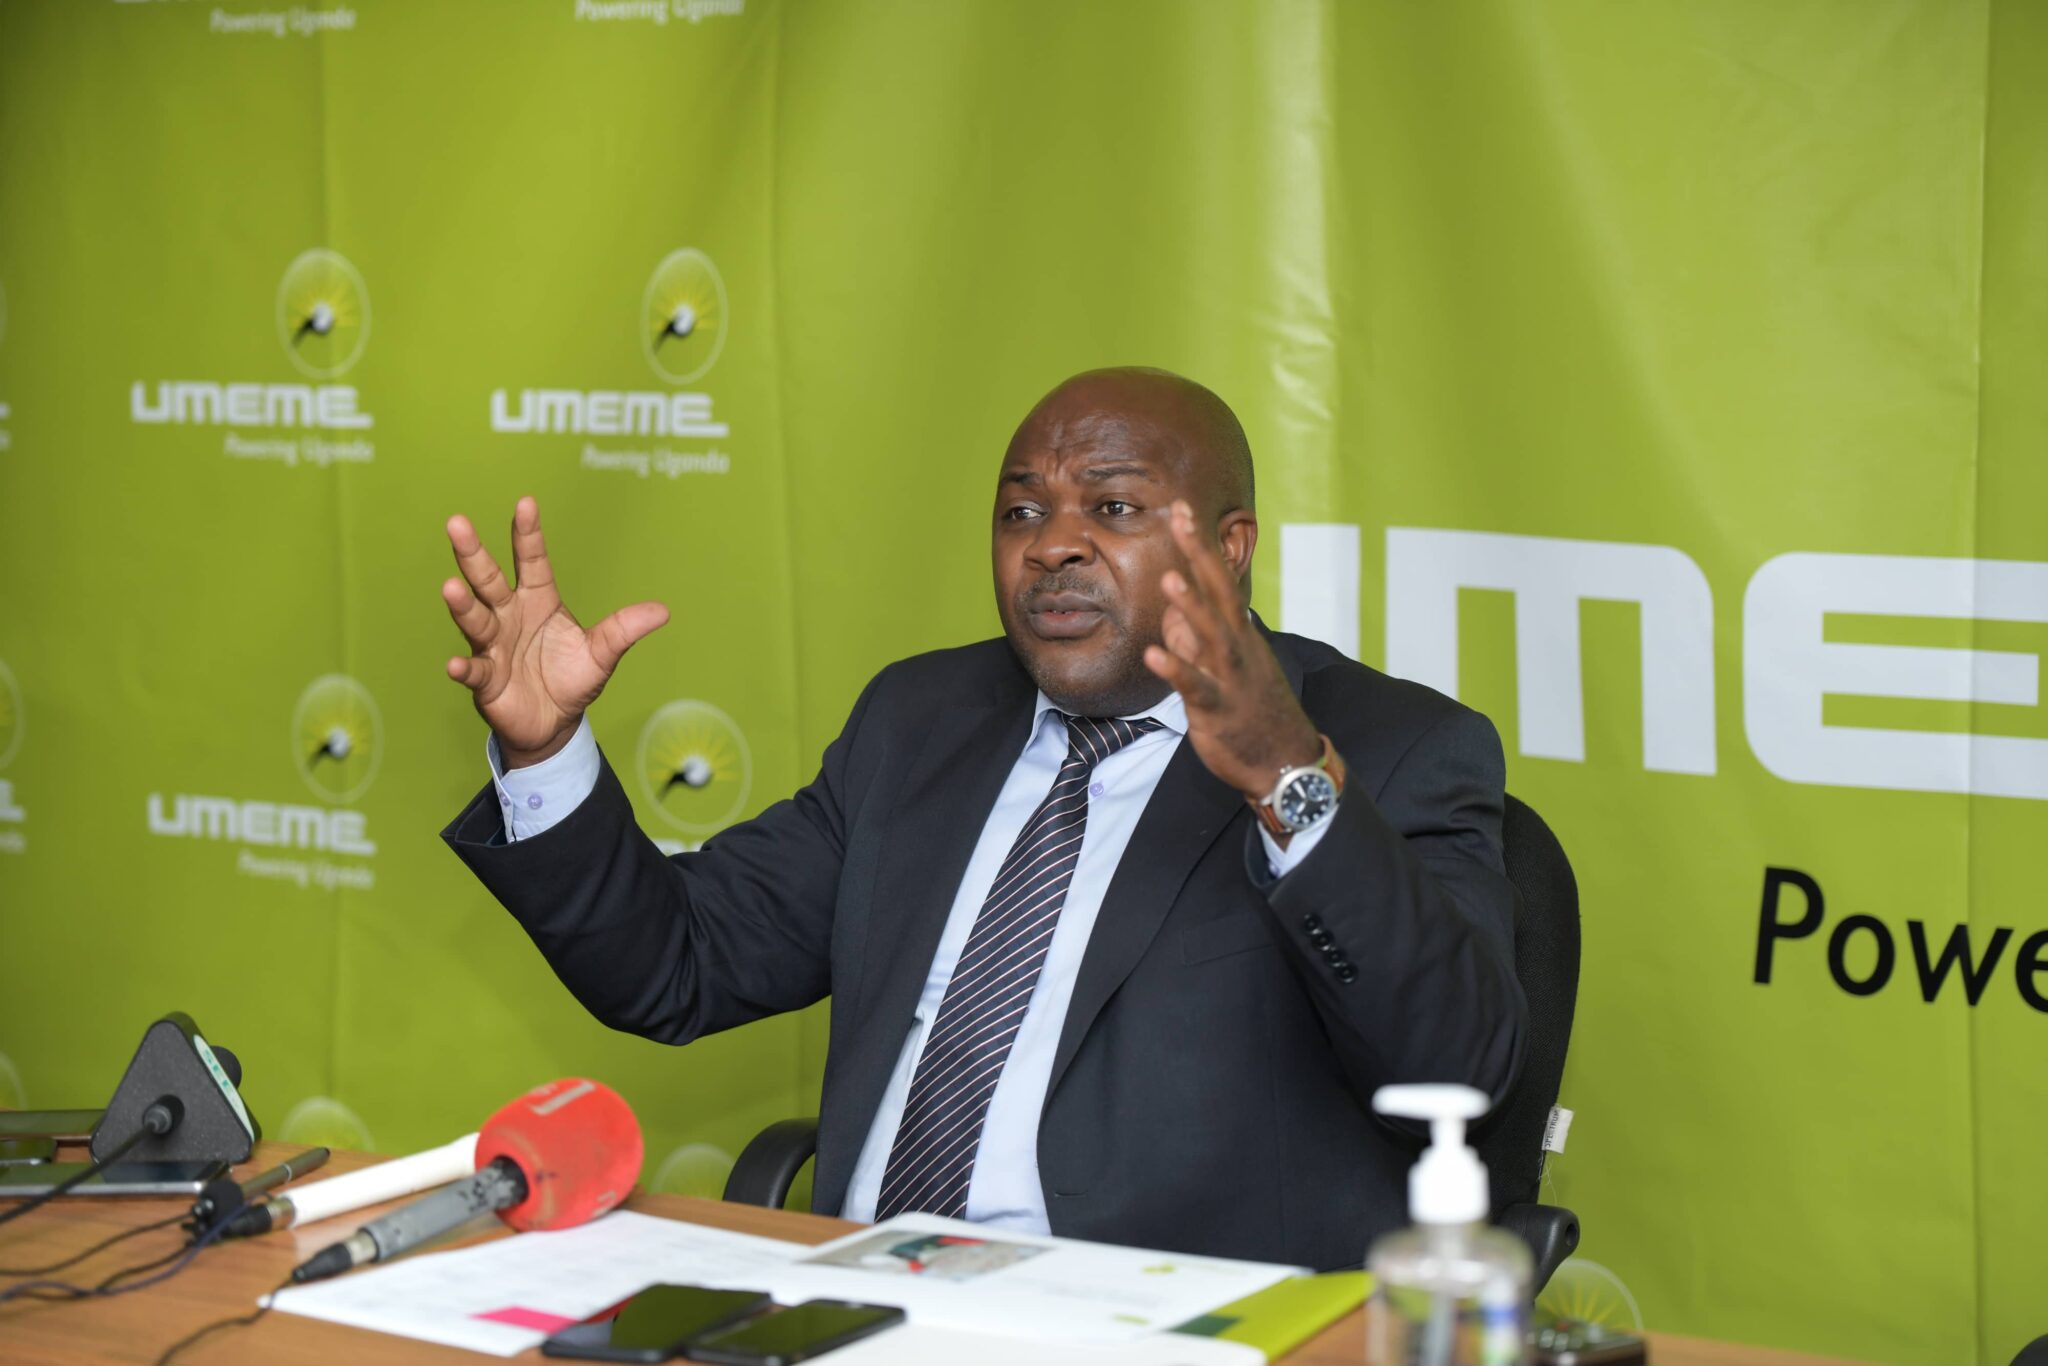 Uncertainty, Bleak Future Looms as Umeme fails to pay shareholders